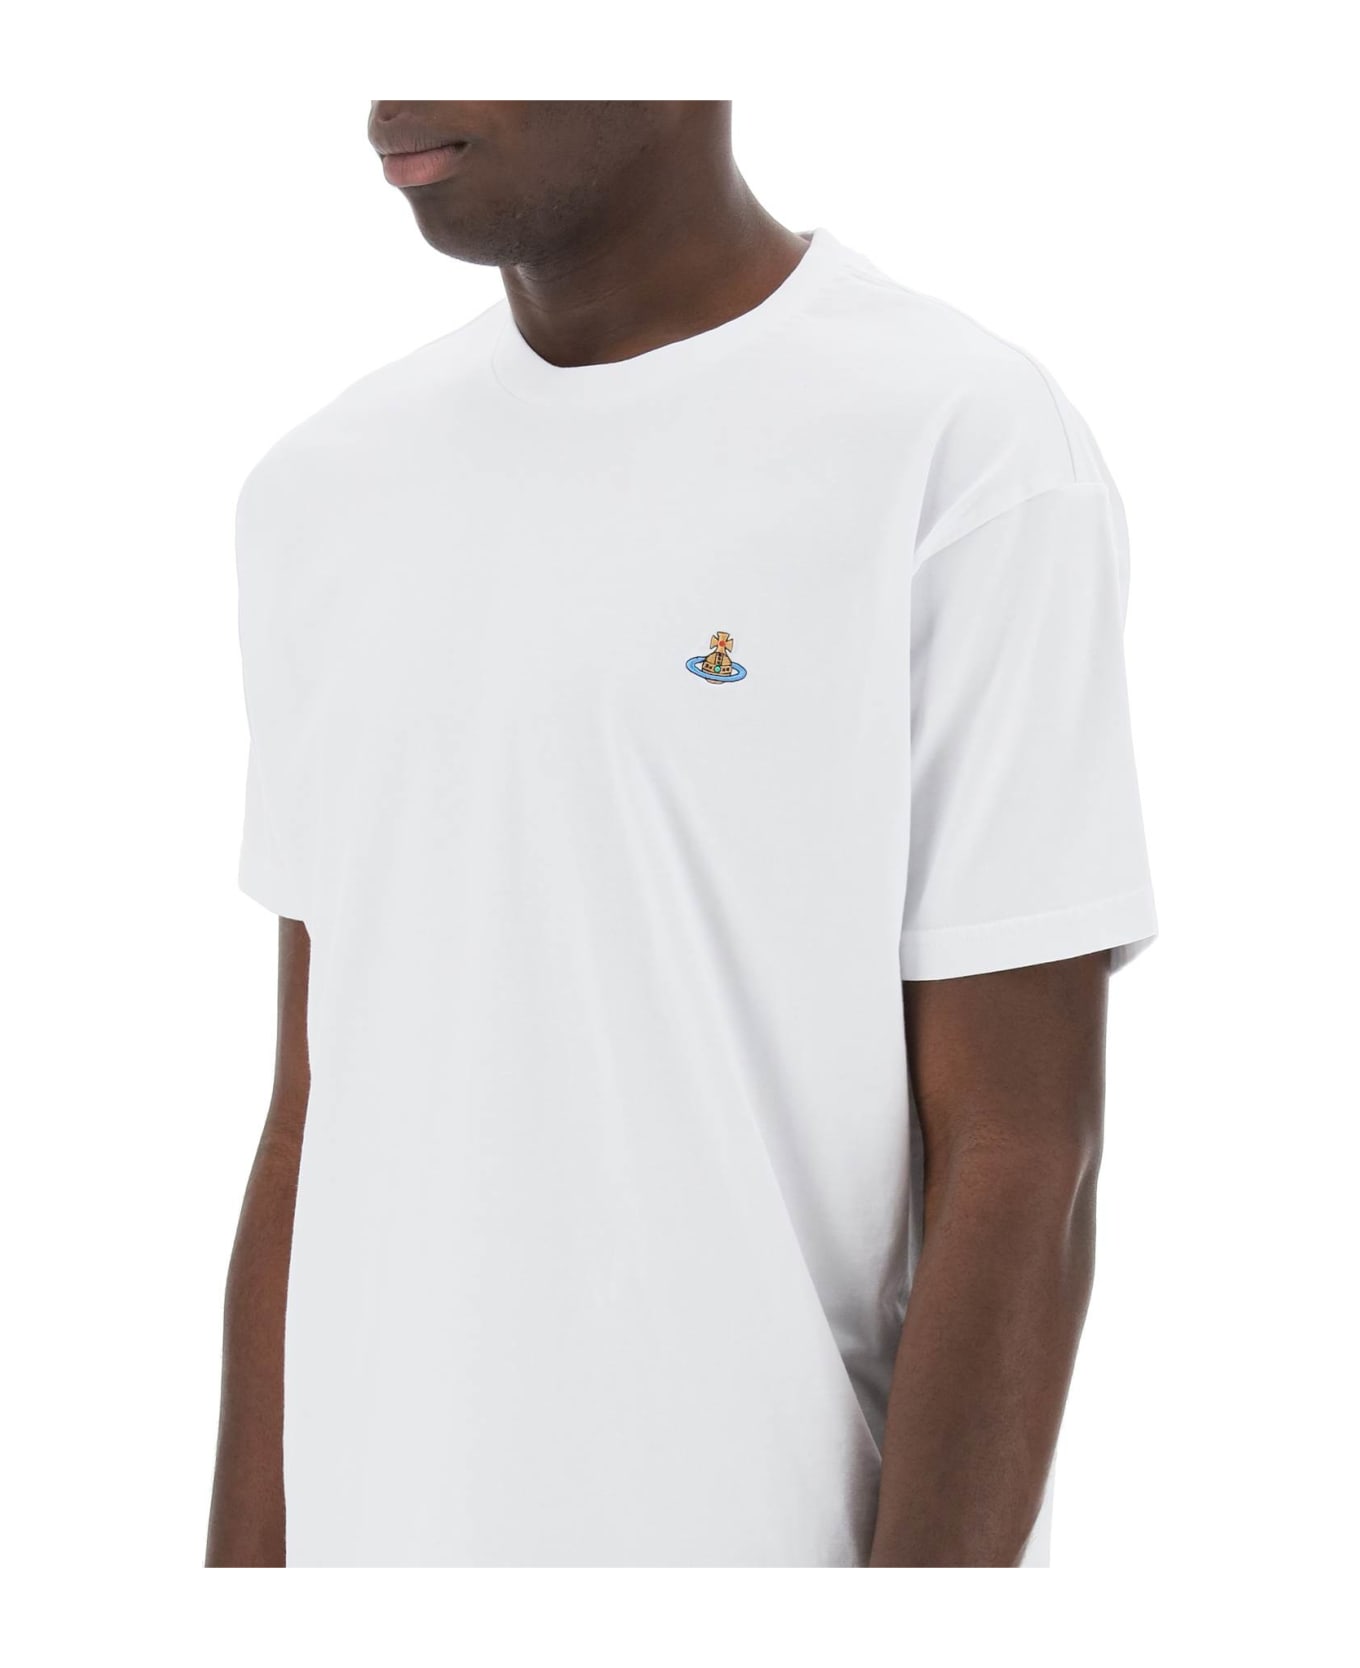 Vivienne Westwood Classic T-shirt With Orb Logo - WHITE (White)